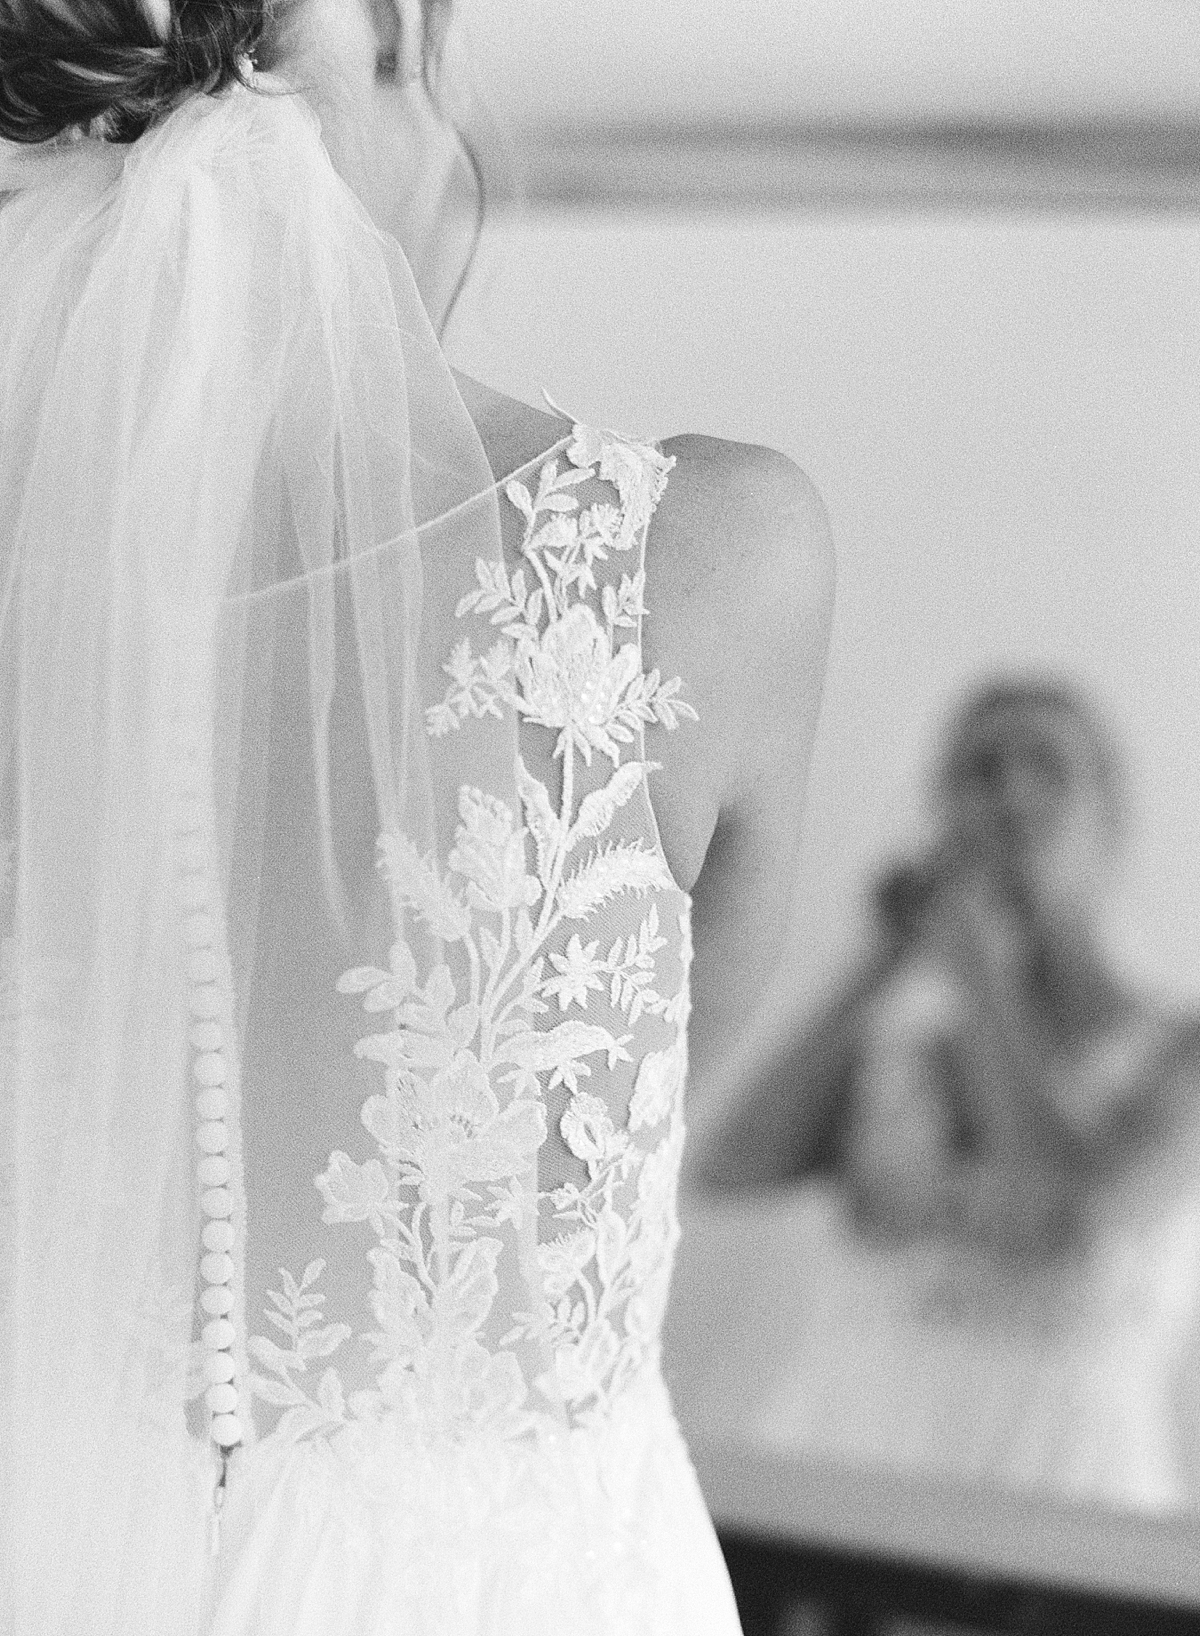 A bride puts on her earrings while looking into the mirror on black and white film.